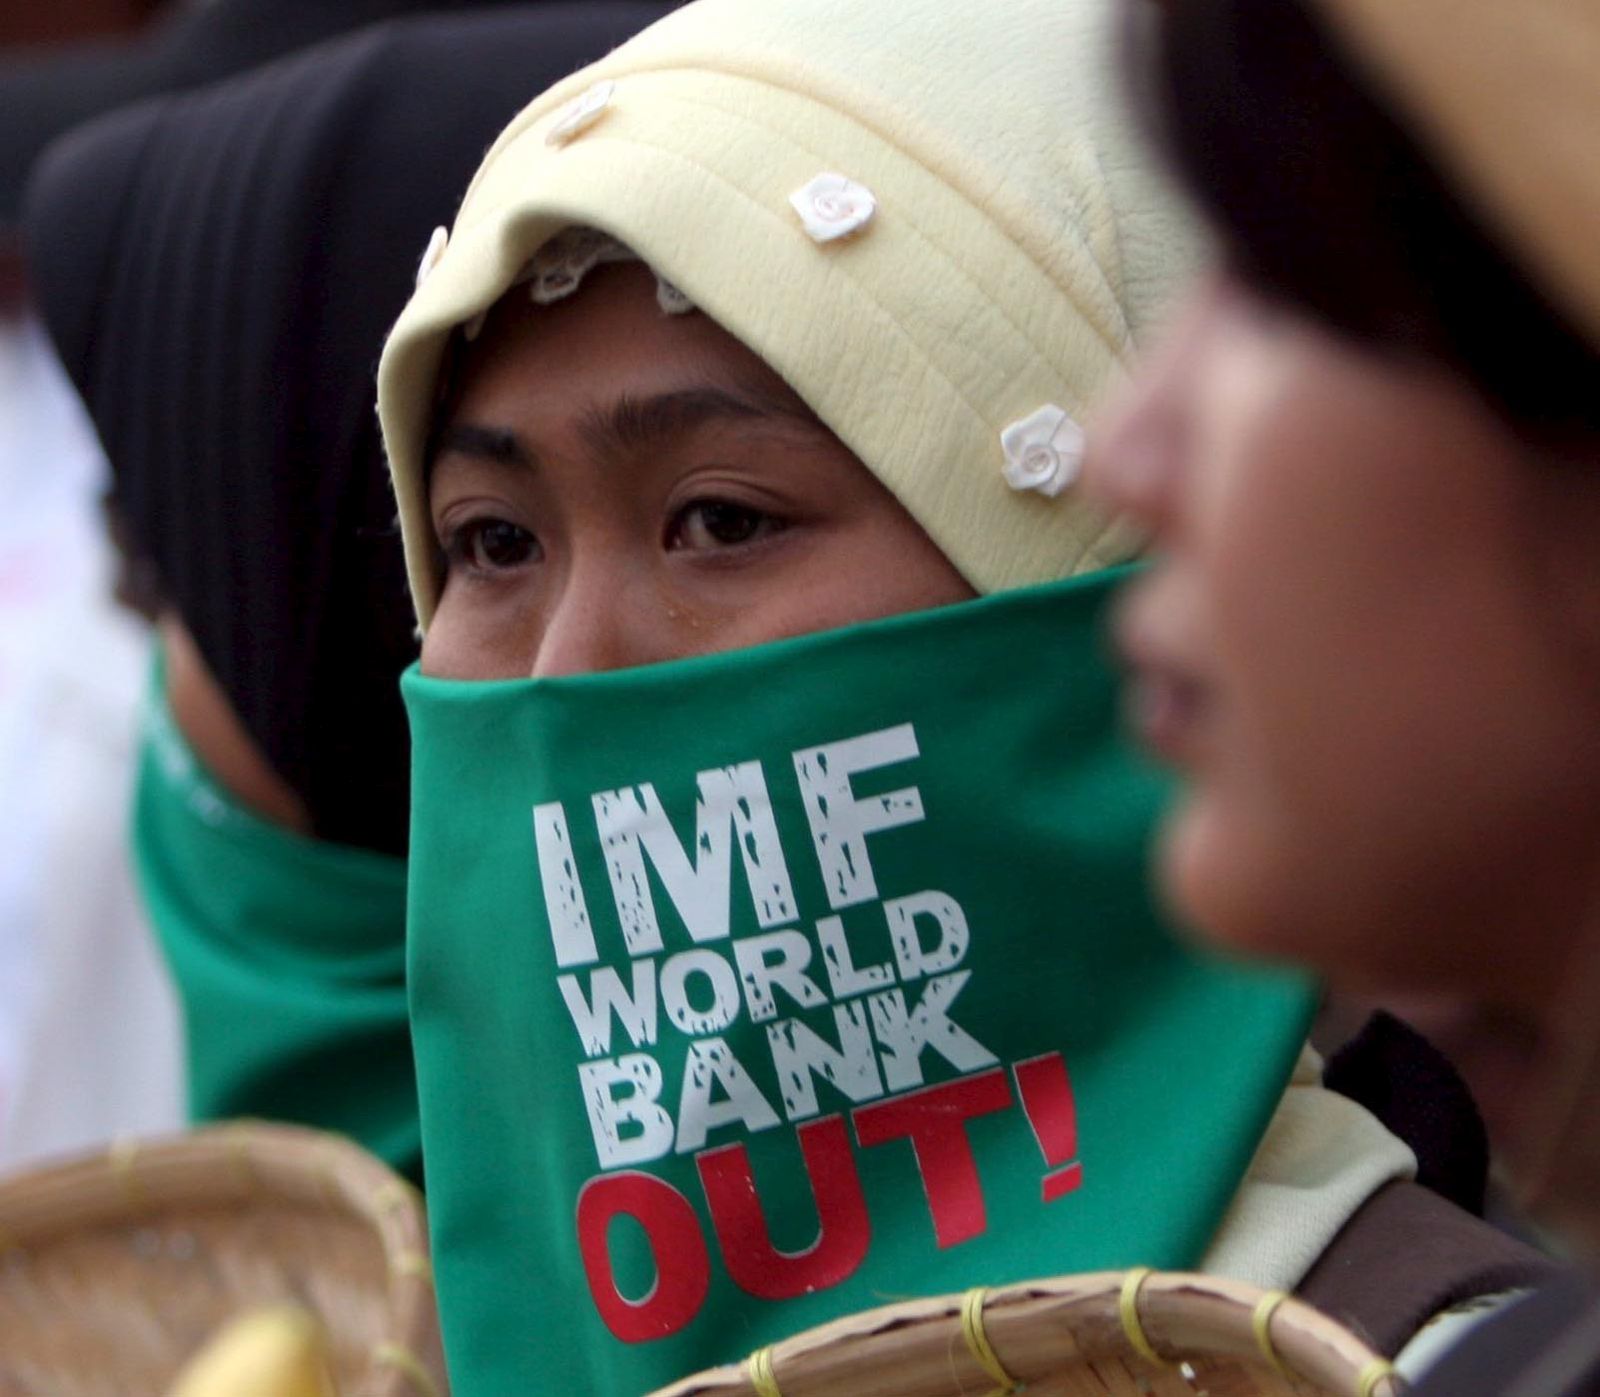 In Indonesia, IFI reputation has suffered long-term: protestor in Jakarta in 2006.